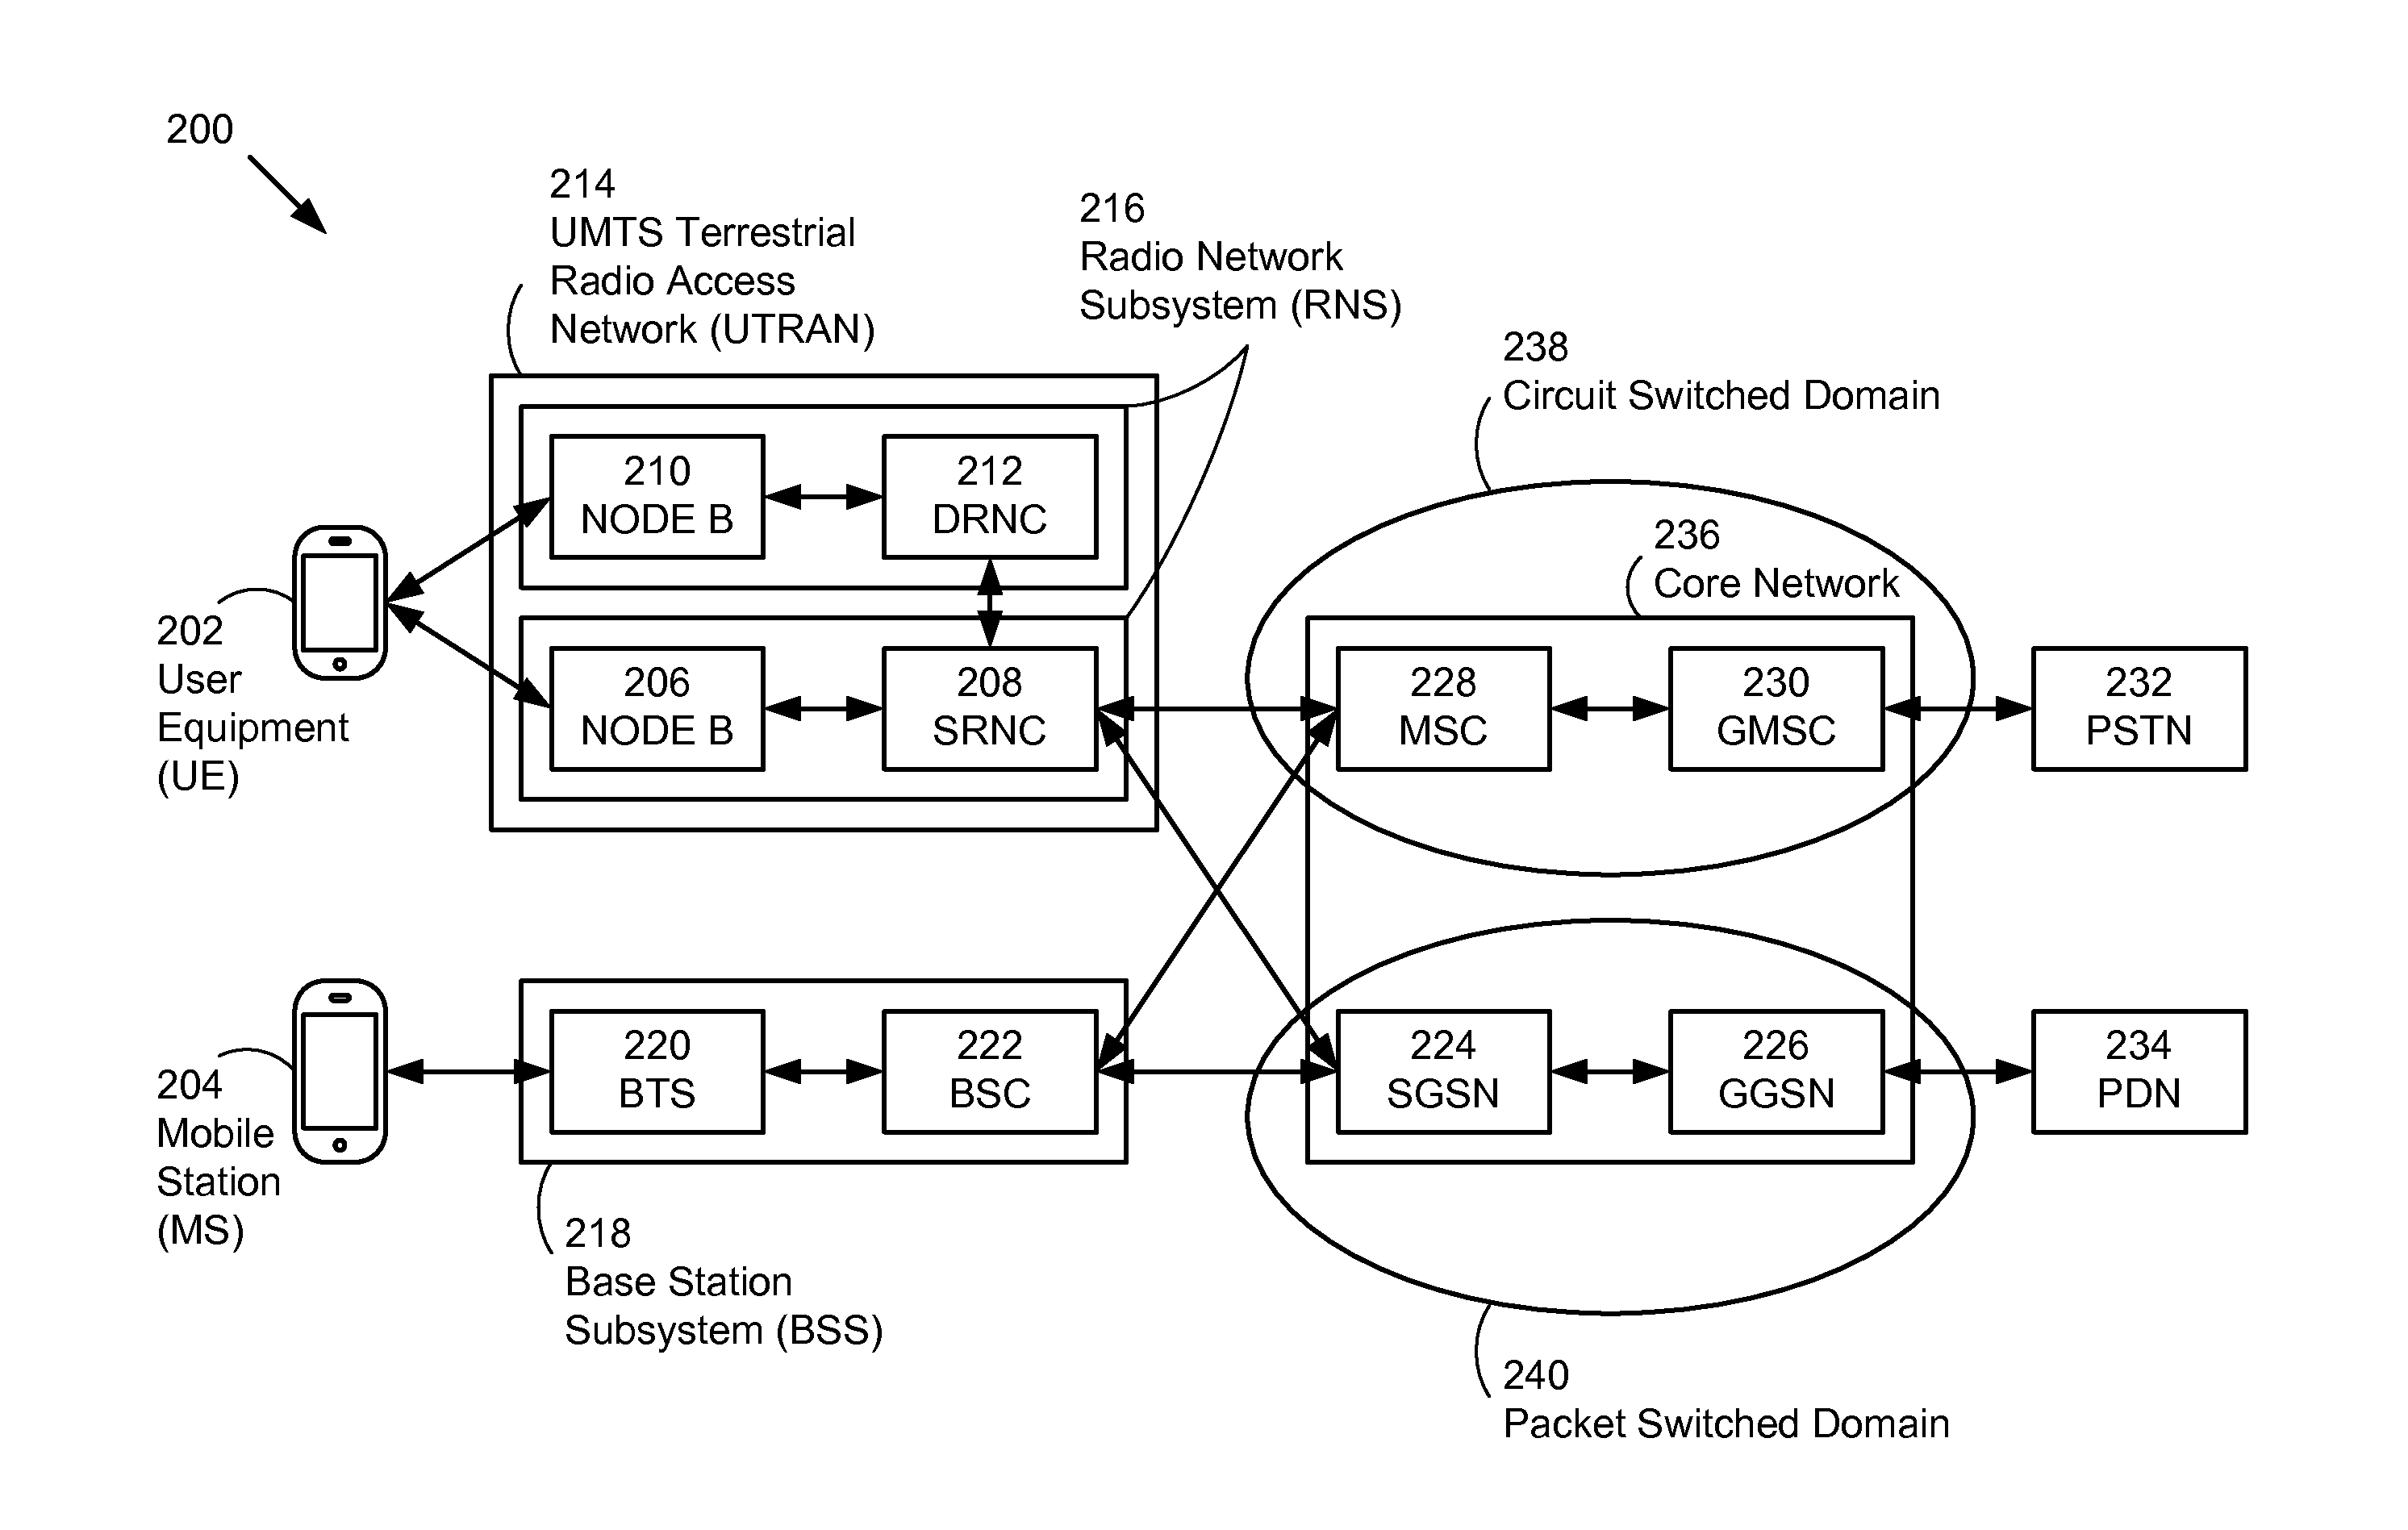 Radio resource signaling during network congestion in a mobile wireless device